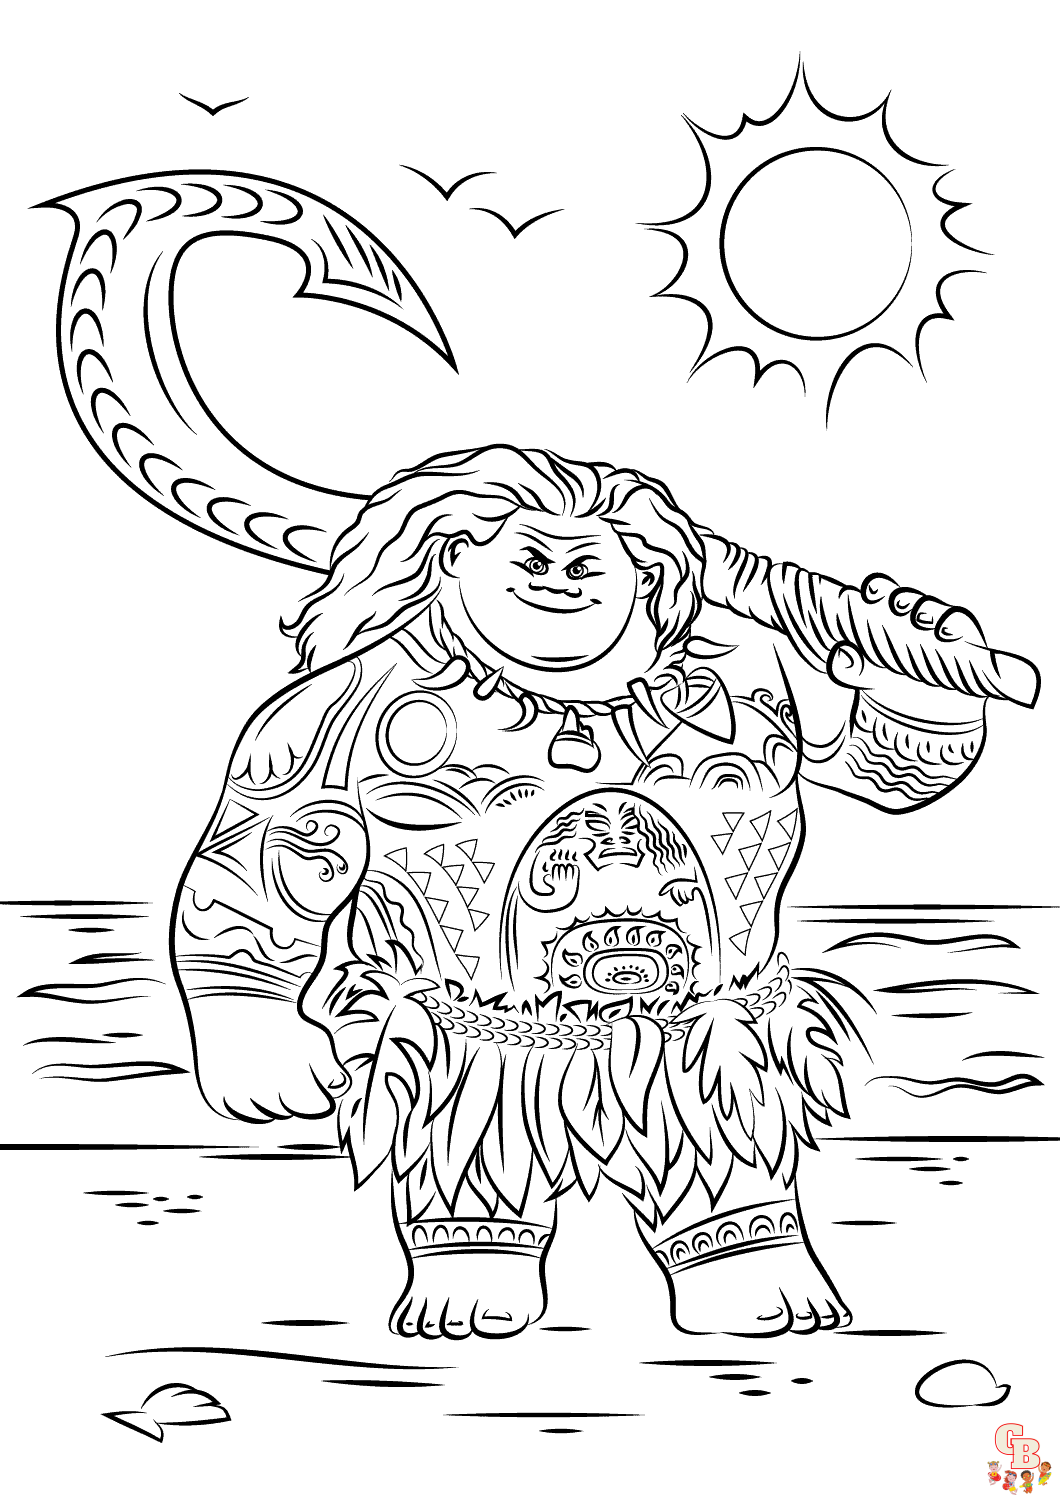 Maui From Moana coloring pages easy